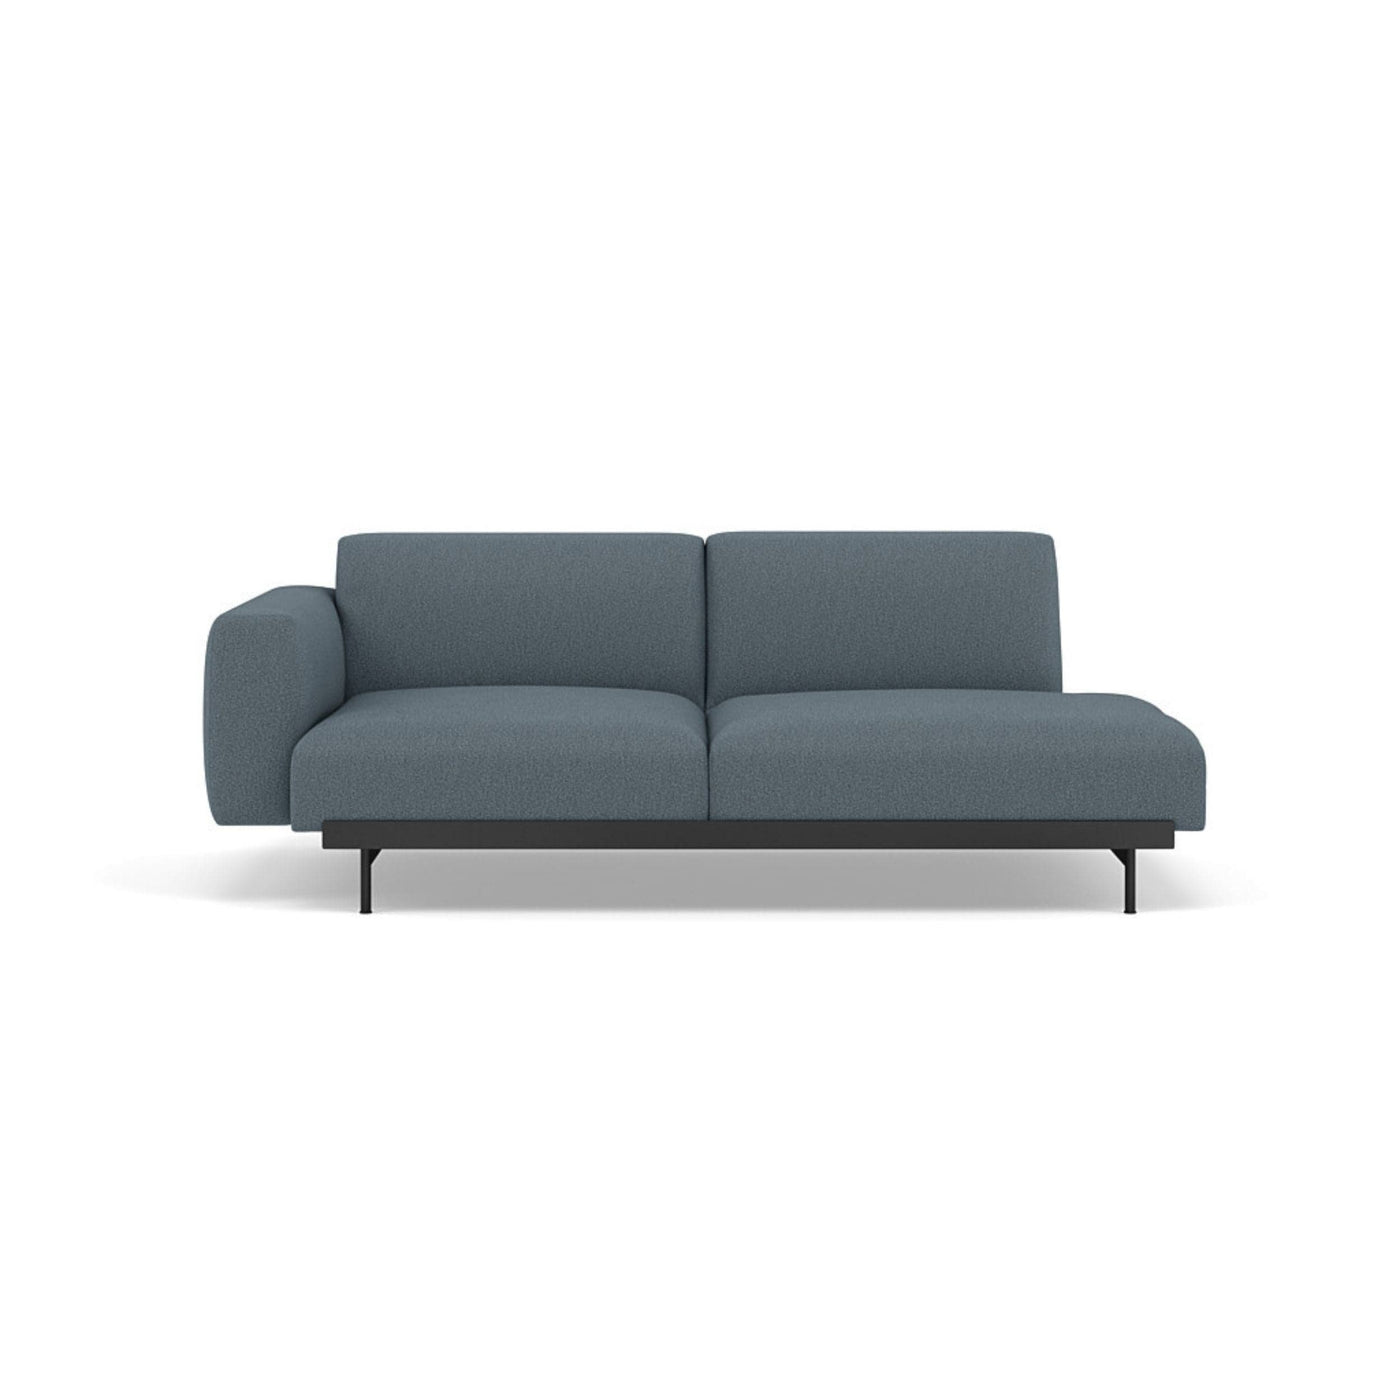 Muuto In Situ Modular 2 Seater Sofa, configuration 3 in clay 1 fabric. Made to order from someday designs #colour_clay-1-blue